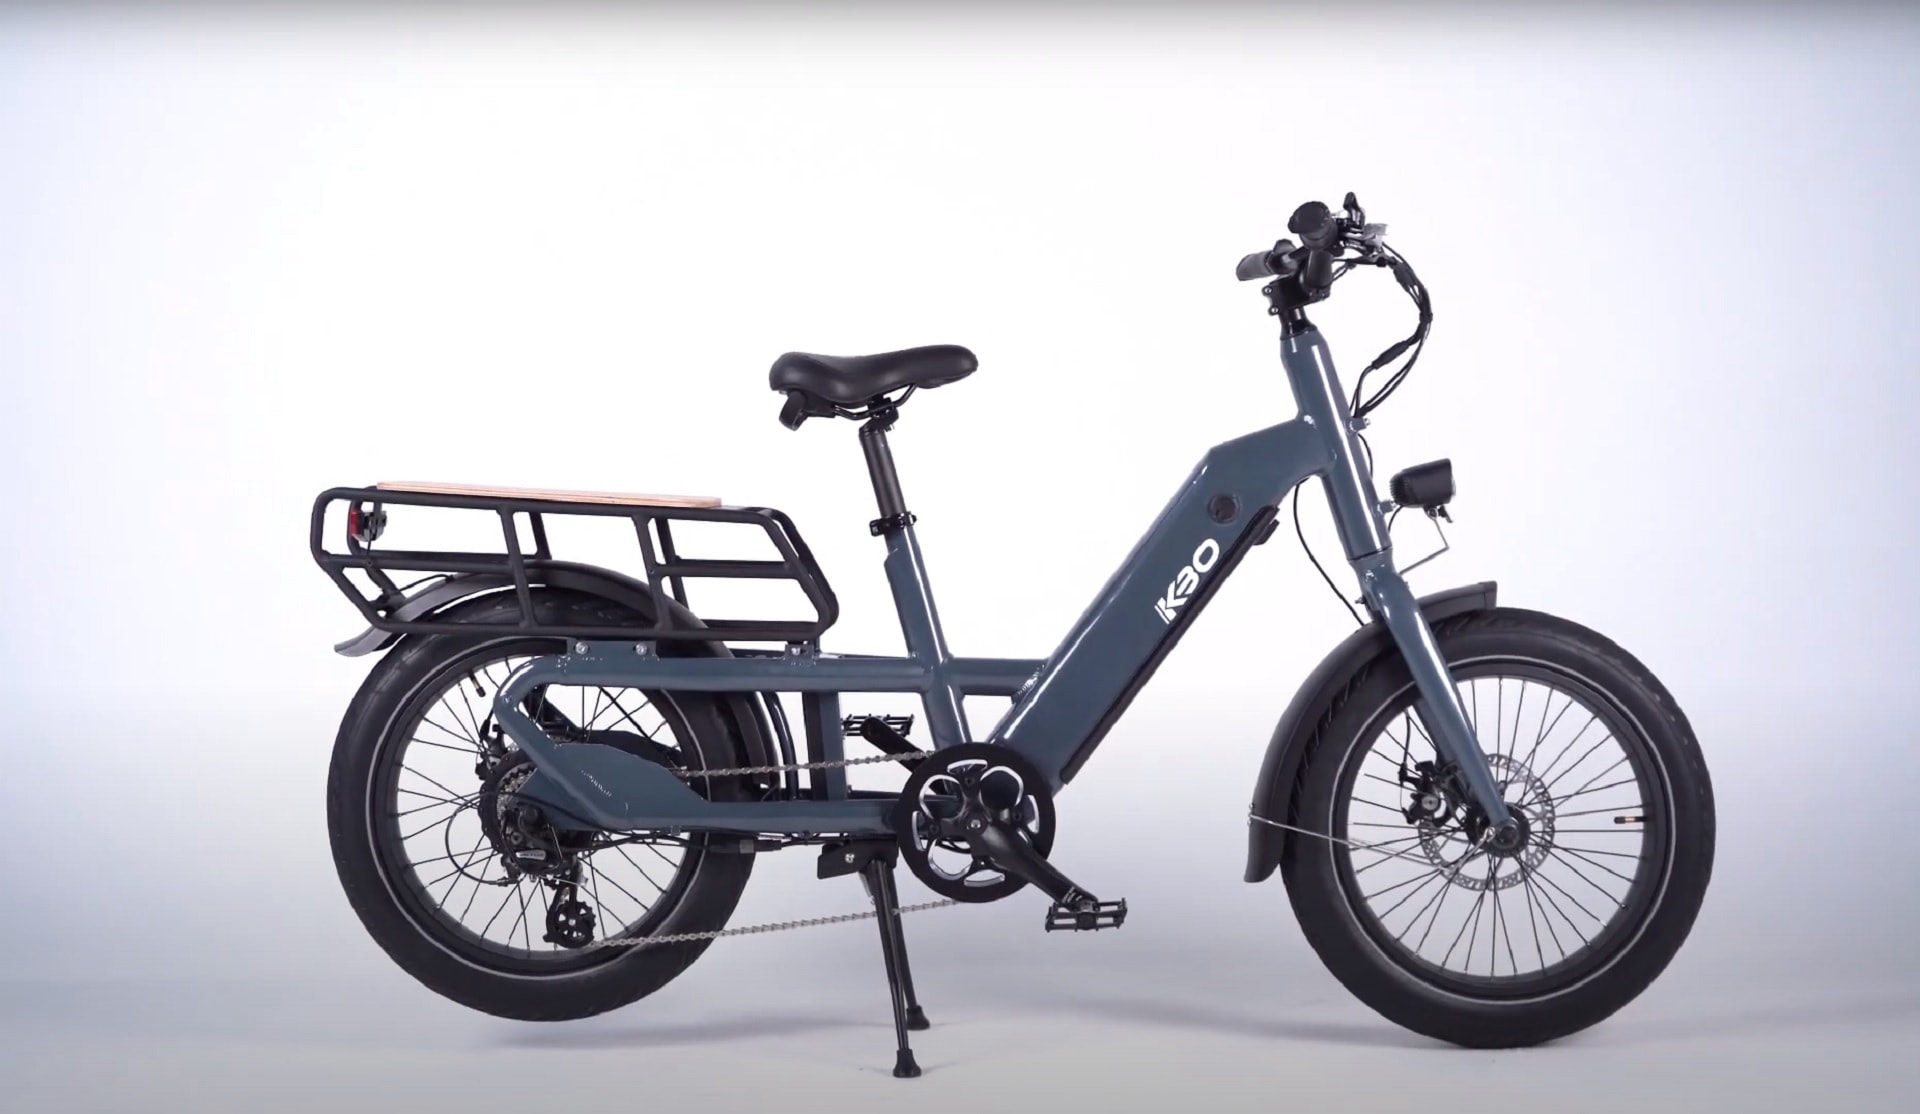 kbo s first cargo e bike promises a payload capacity of 400 lb and a 60 mile range